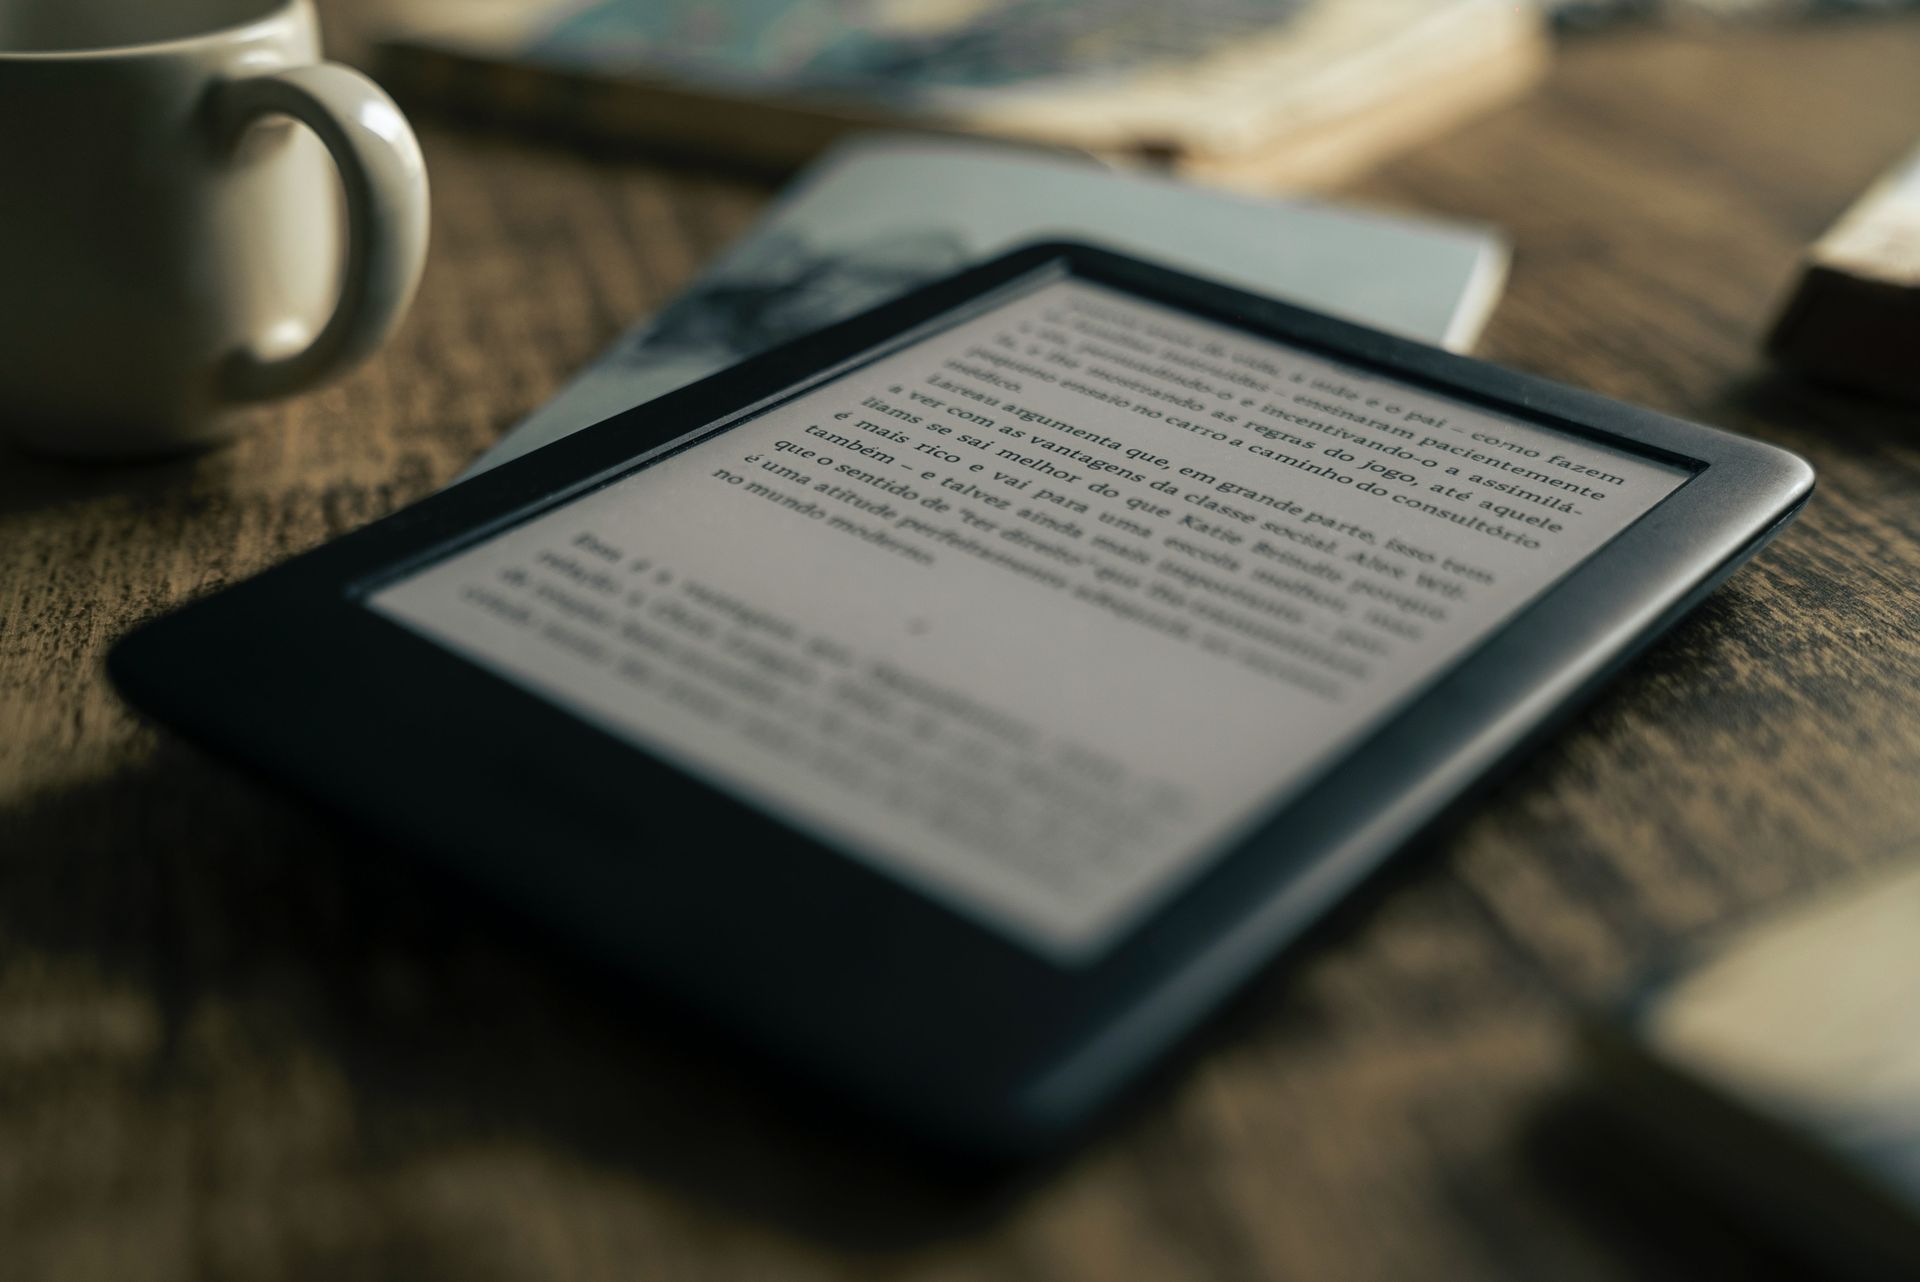 Discover Amazon First Reads October 2023's top kindle reads - Your gateway to affordable and early access to captivating books. Join now!